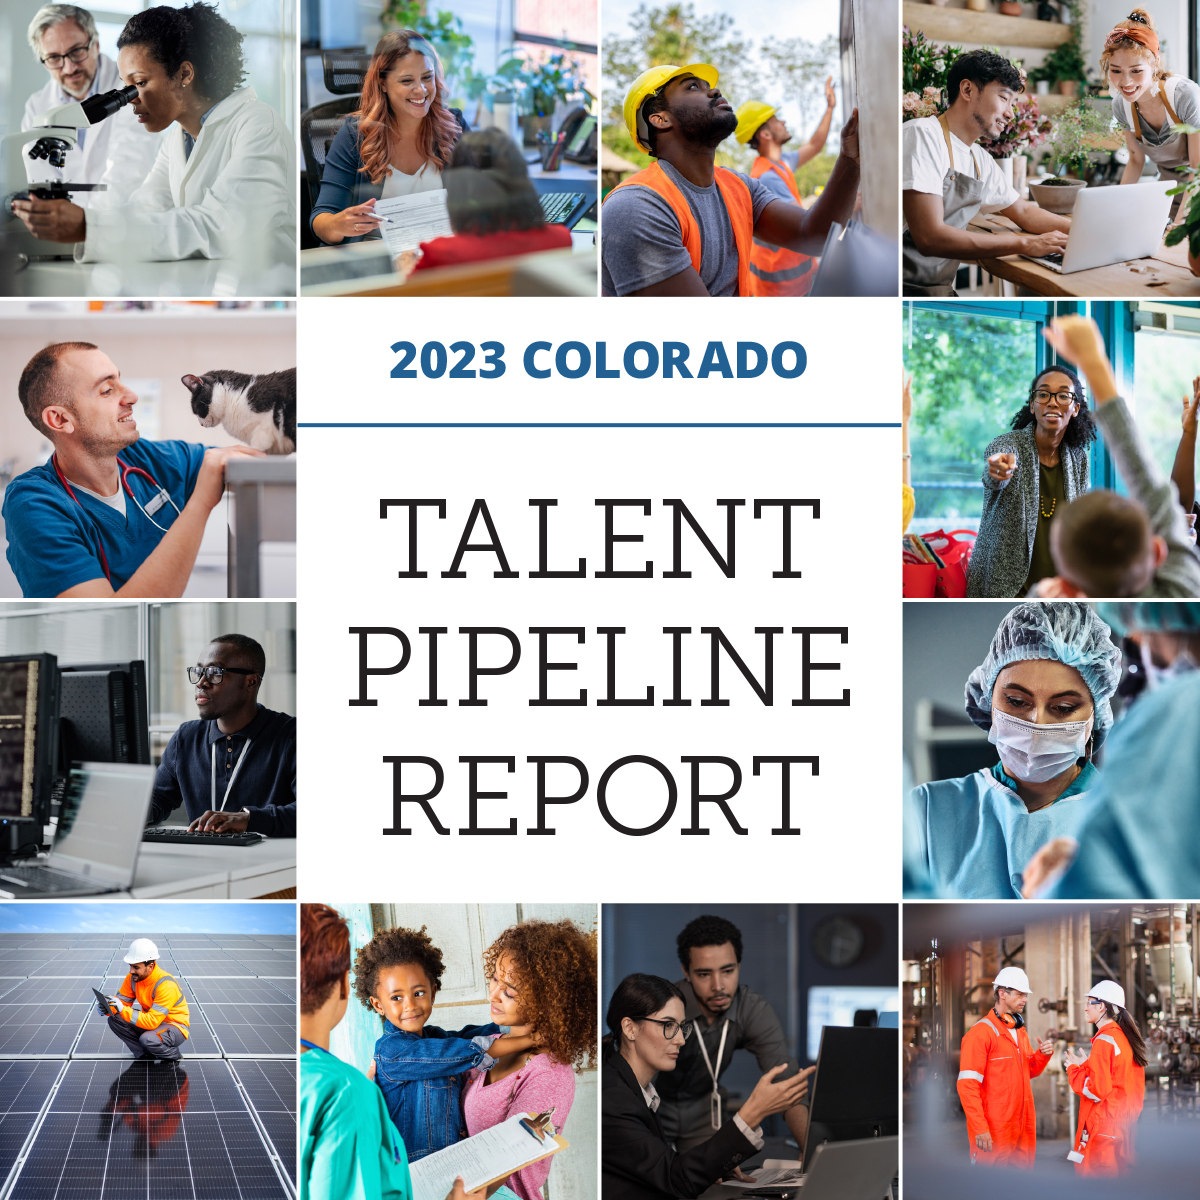 The 2023 Talent Pipeline Report, released in December by @the_cwdc, analyzes and explains labor market information, highlights talent development strategies, and provides data-informed opportunities to enhance Colorado's talent pipeline. Read it here: cwdc.colorado.gov/resources/colo…